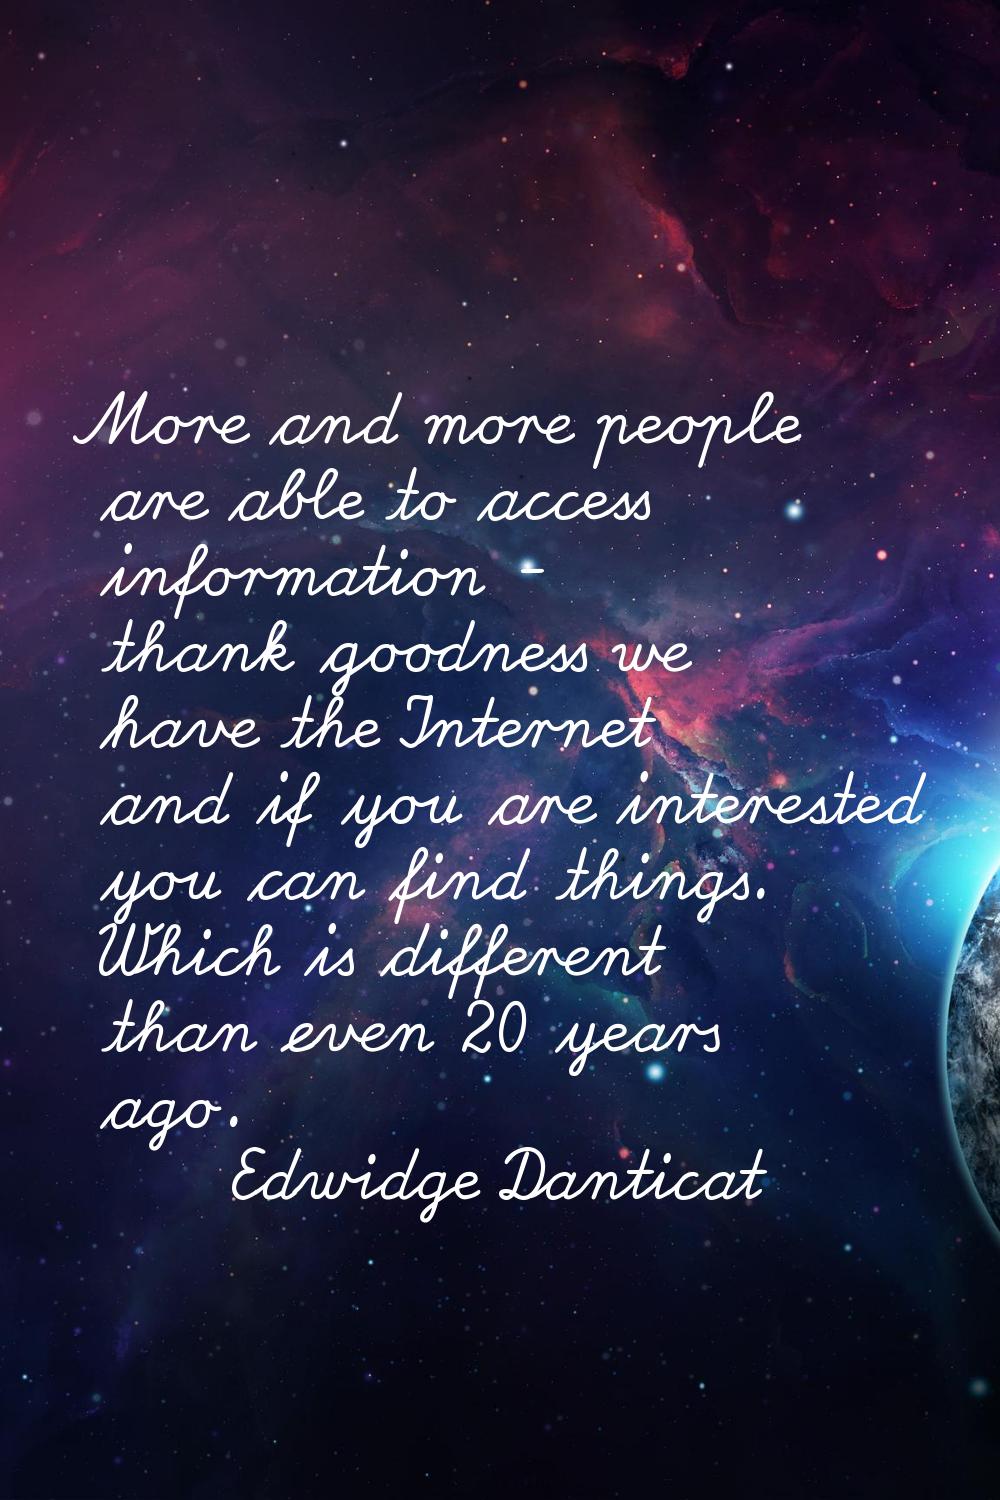 More and more people are able to access information - thank goodness we have the Internet and if yo